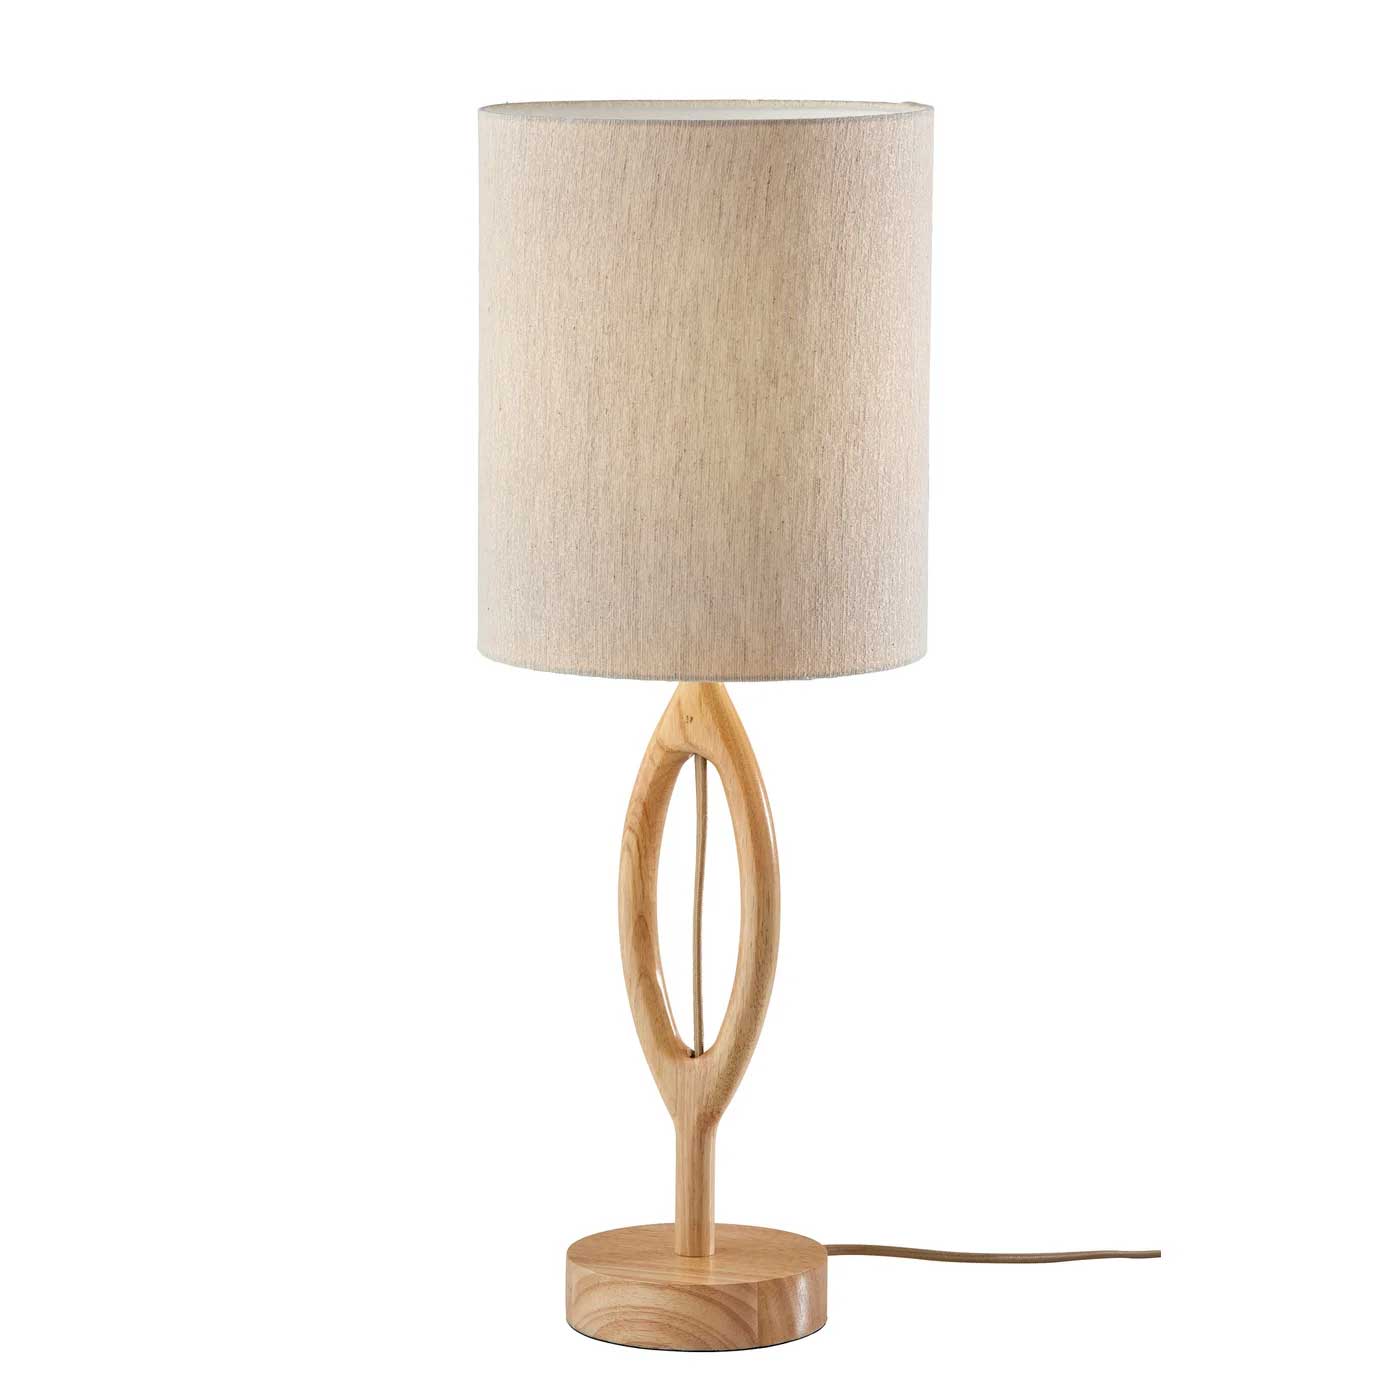 MAYFAIR Table lamp Wood - 1627-12 | ADESSO